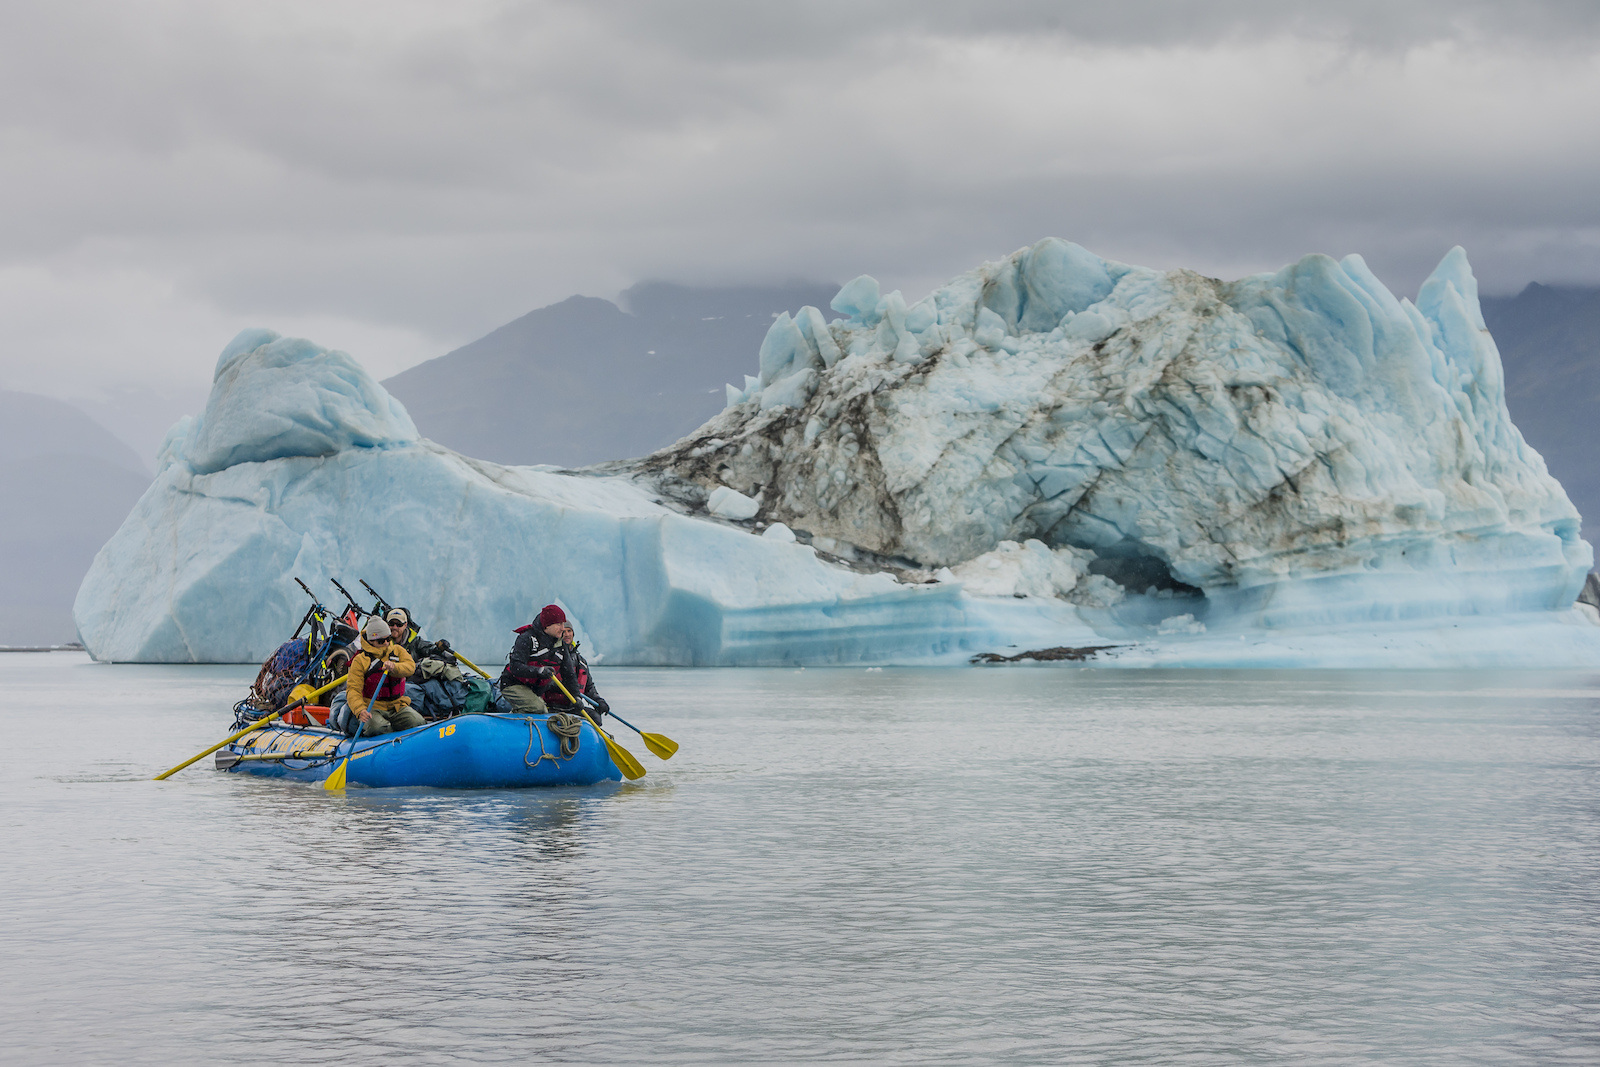 Darren Berrecloth, along with Tyler McCaul, Carson Storch and their guide Mike Neville paddle through Alsek Lake in the Tatshenshini-Alsek Provincial Park in British Columbia, Canada on September 8, 2016.